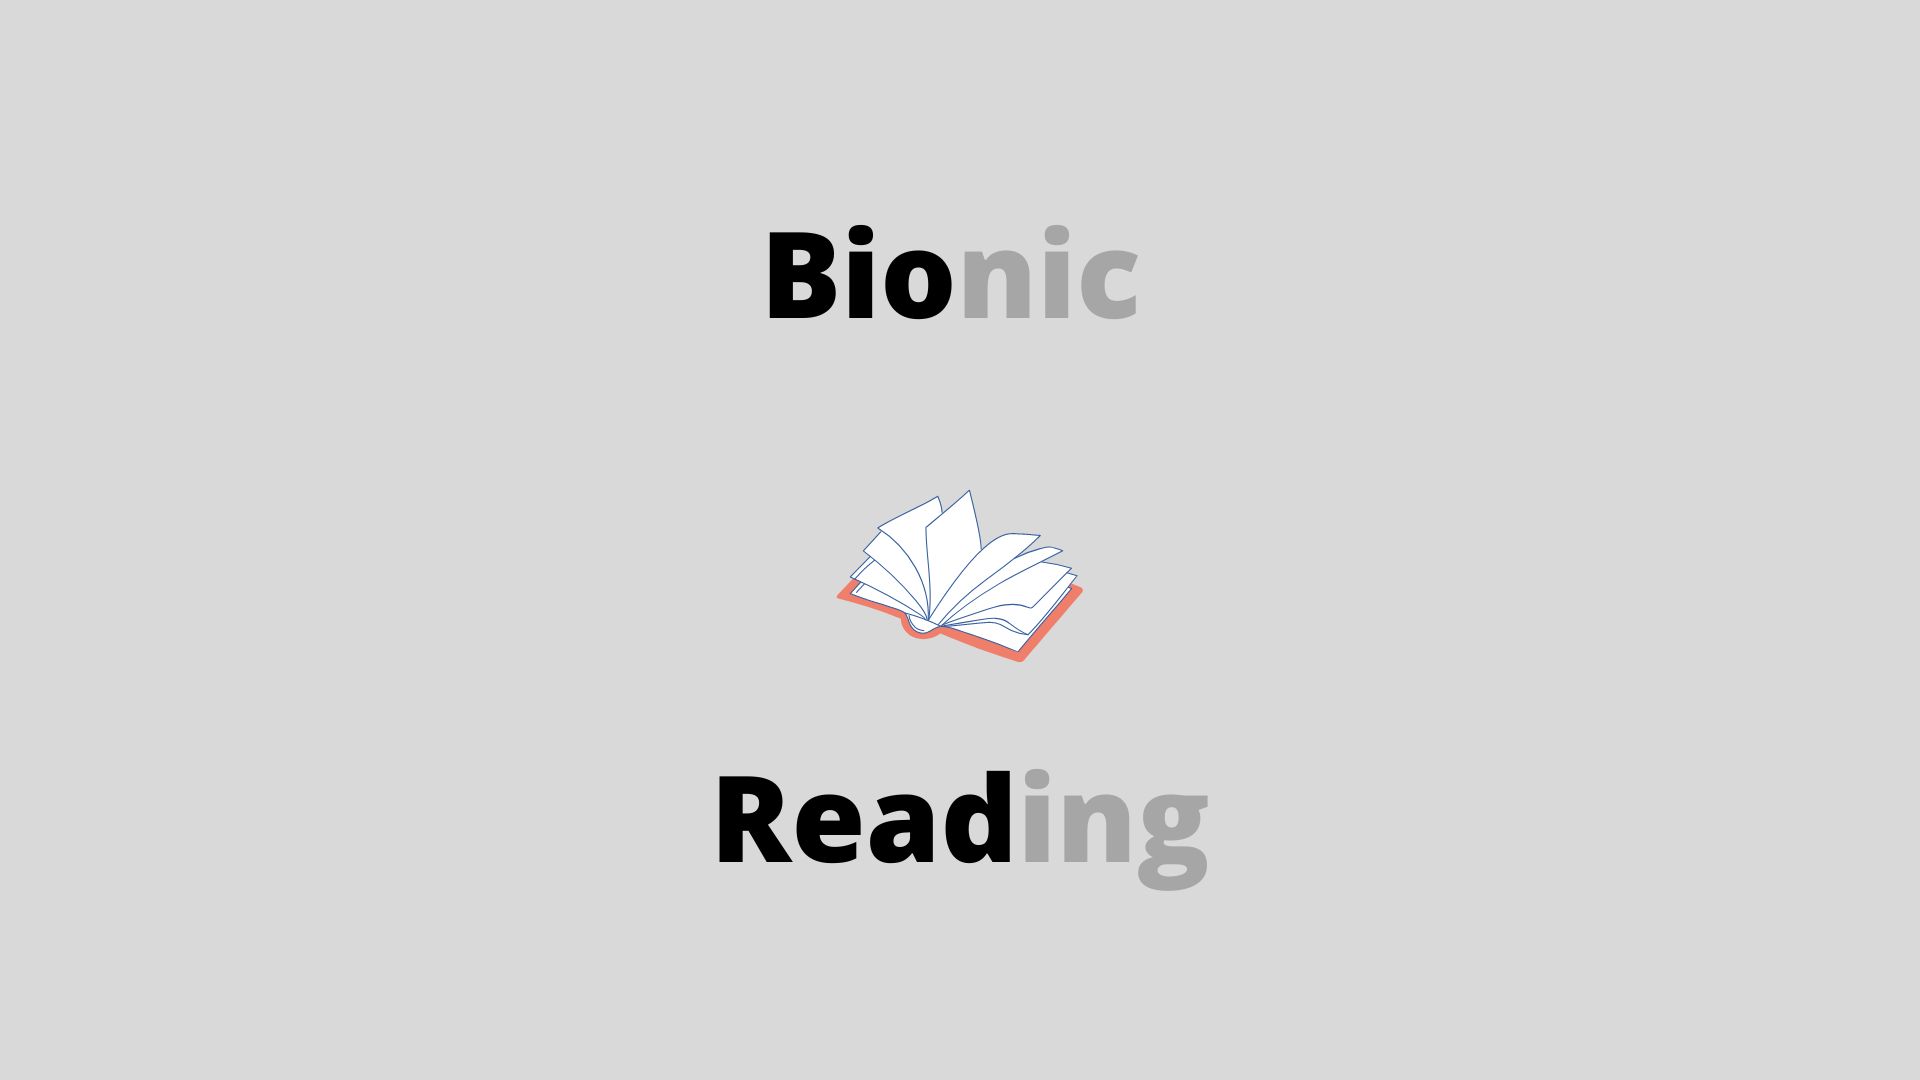 @jerrythefarmer/ask-leo-what-are-your-thoughts-on-bionic-reading